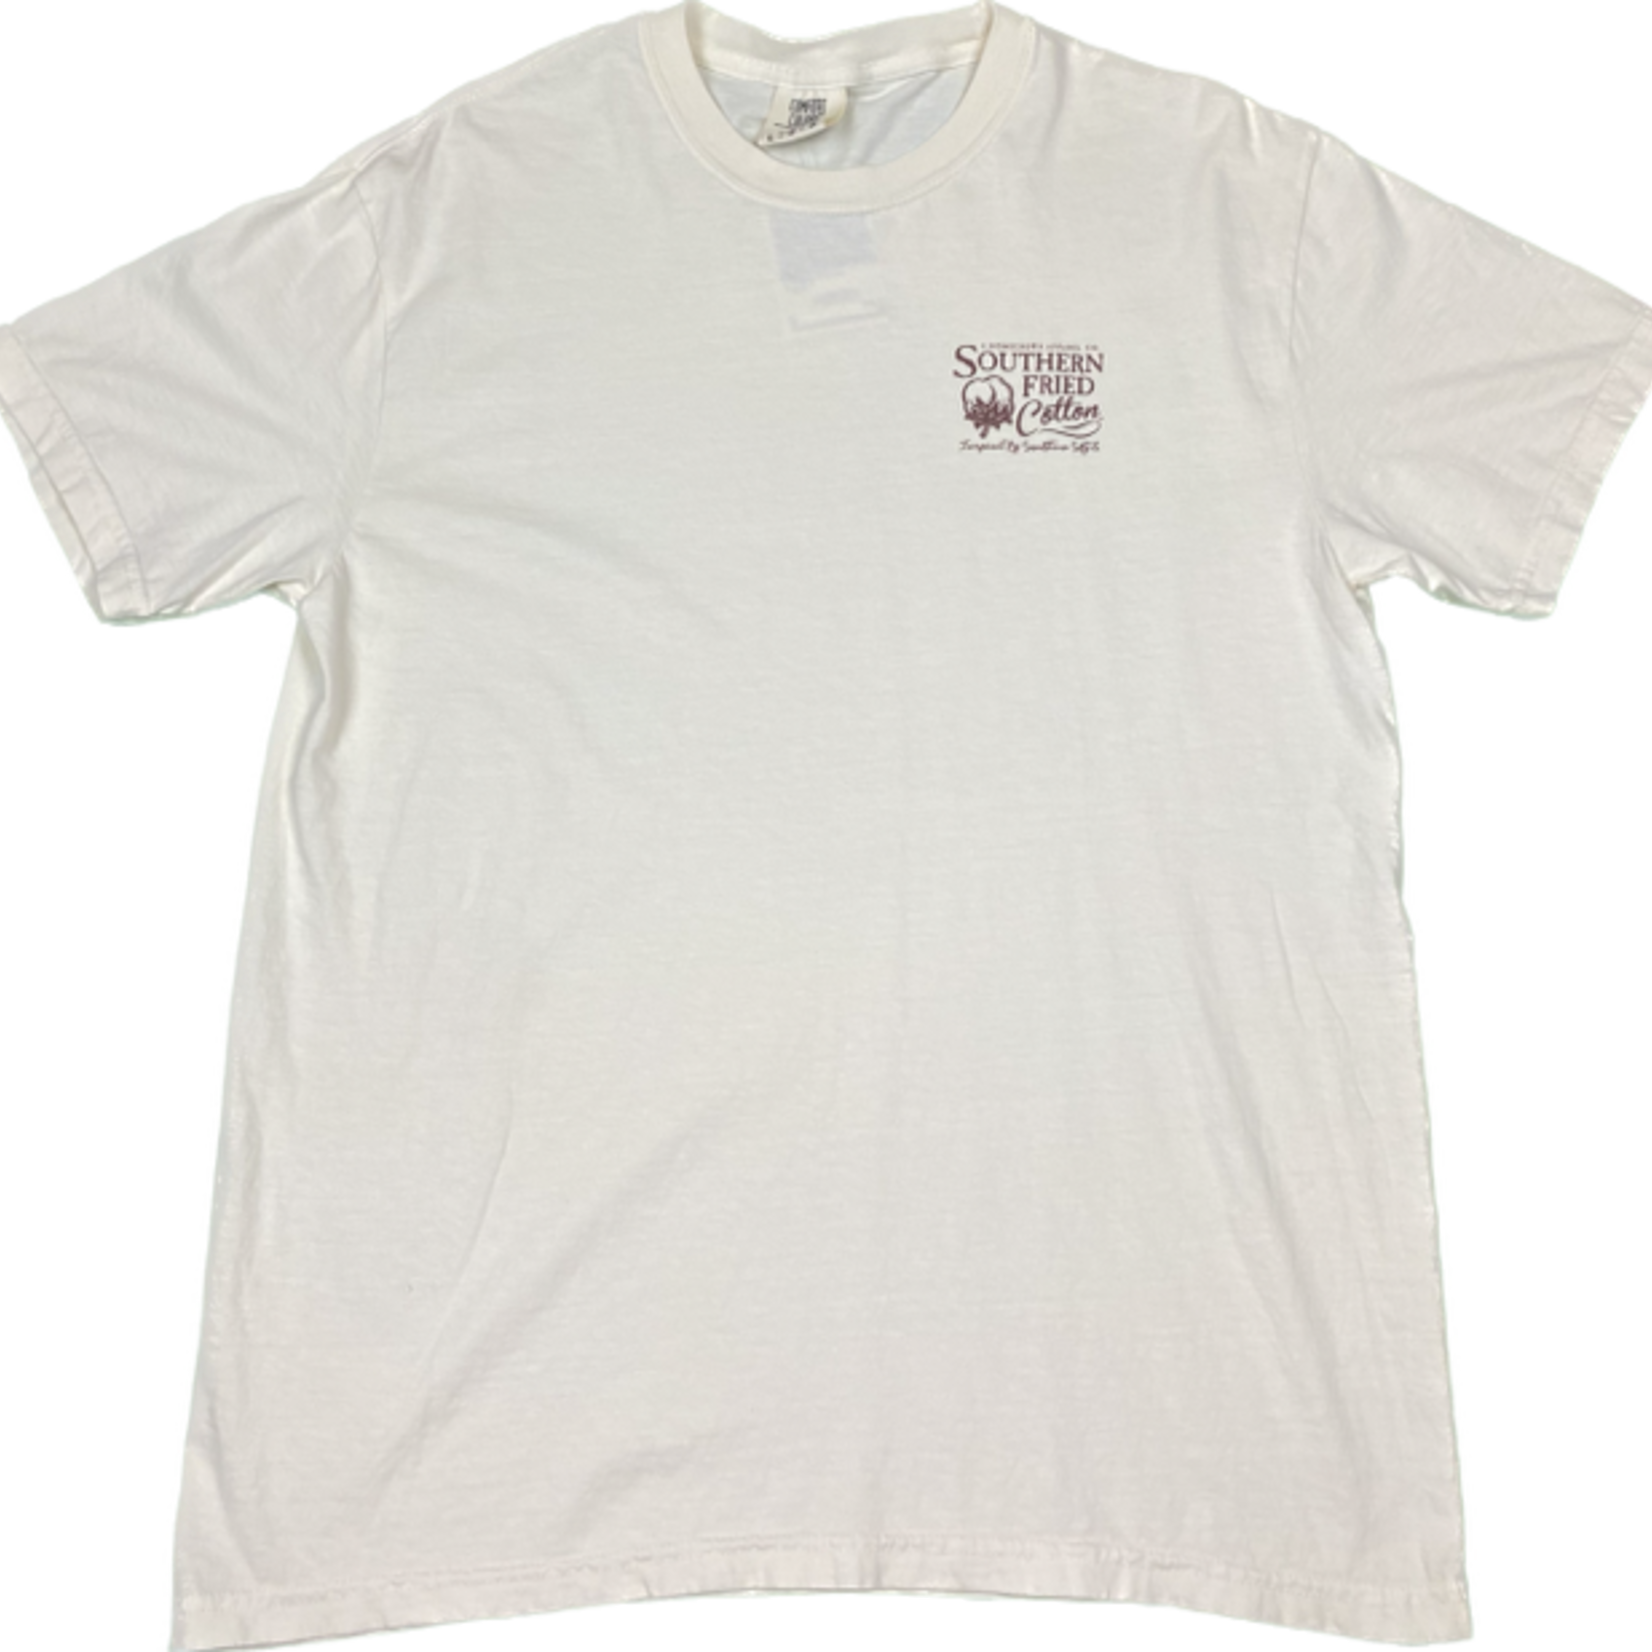 Southern Fried Cotton Spot Tail Label Tee